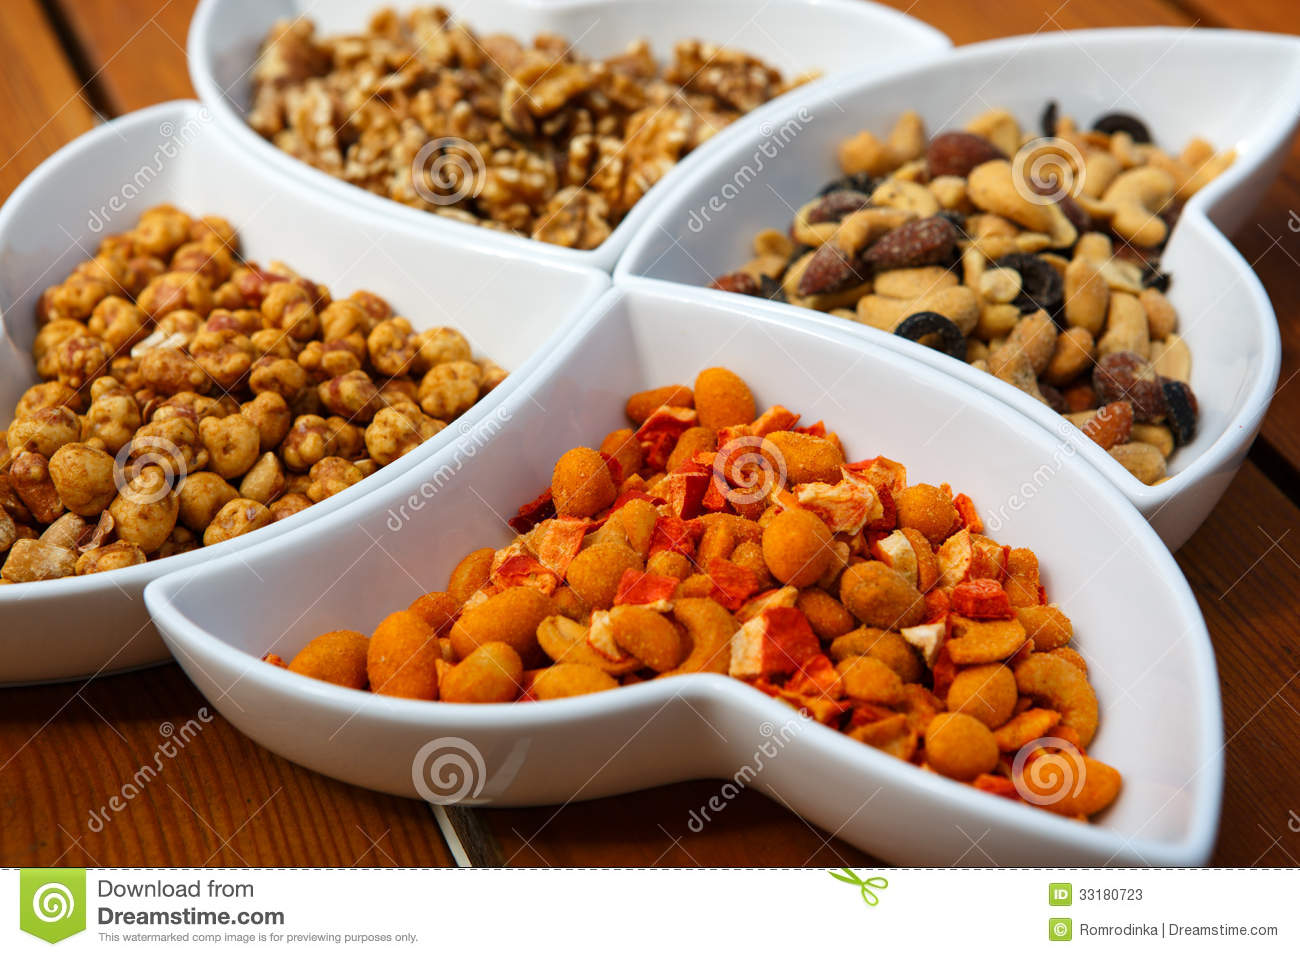 Different Kinds Of Nuts As A Salty Snack Stock Photos   Image    